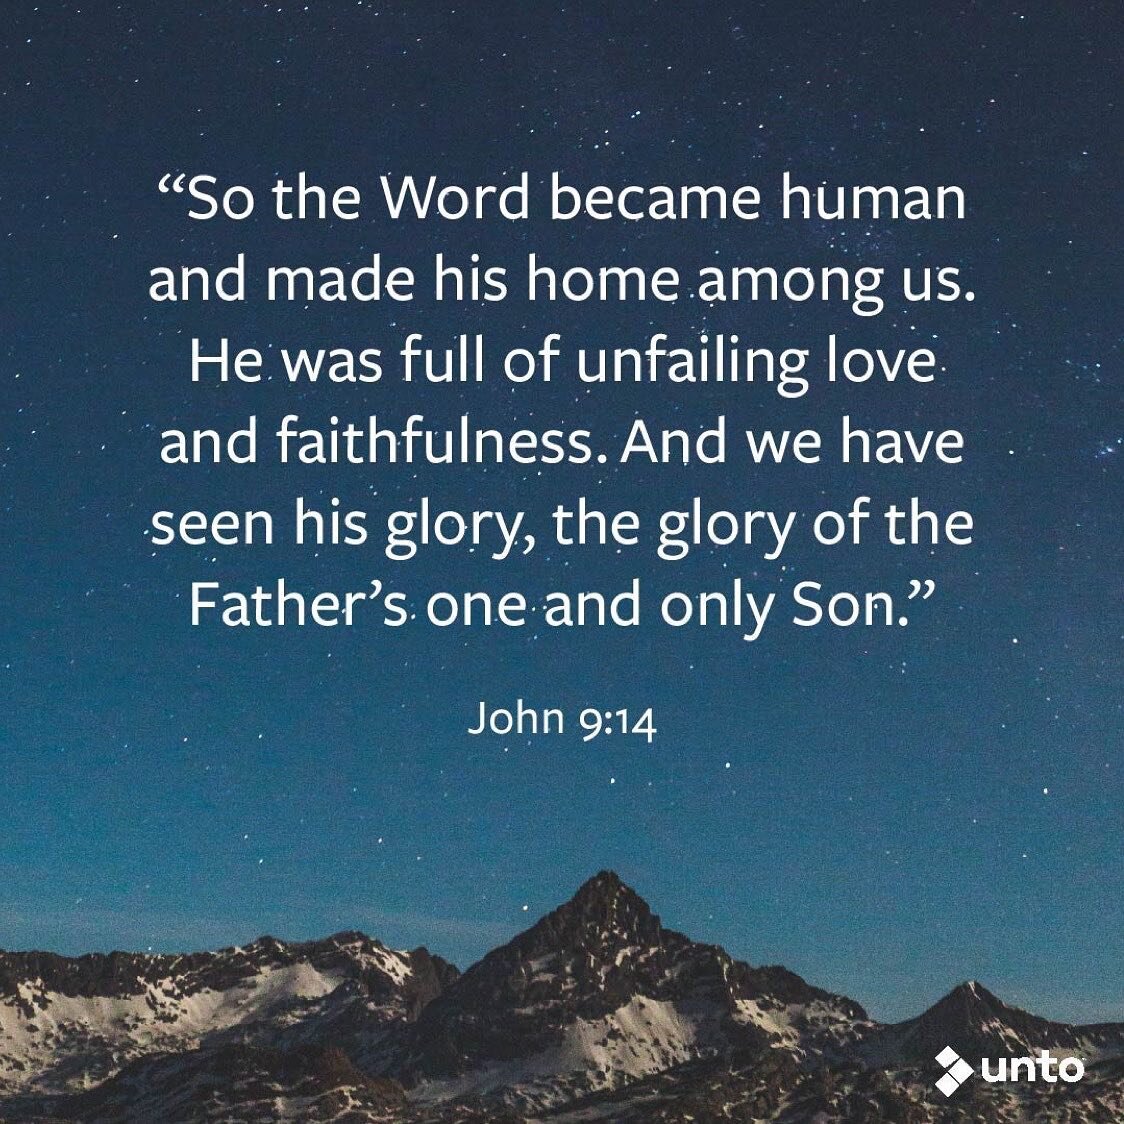 Repost from @unto_people
&bull;
&quot;So the Word became human and made his home among us. He was full of unfailing love and faithfulness. And we have seen his glory, the glory of the Father&rsquo;s one and only son.&rdquo; &ndash; John 9:14 #MondayM